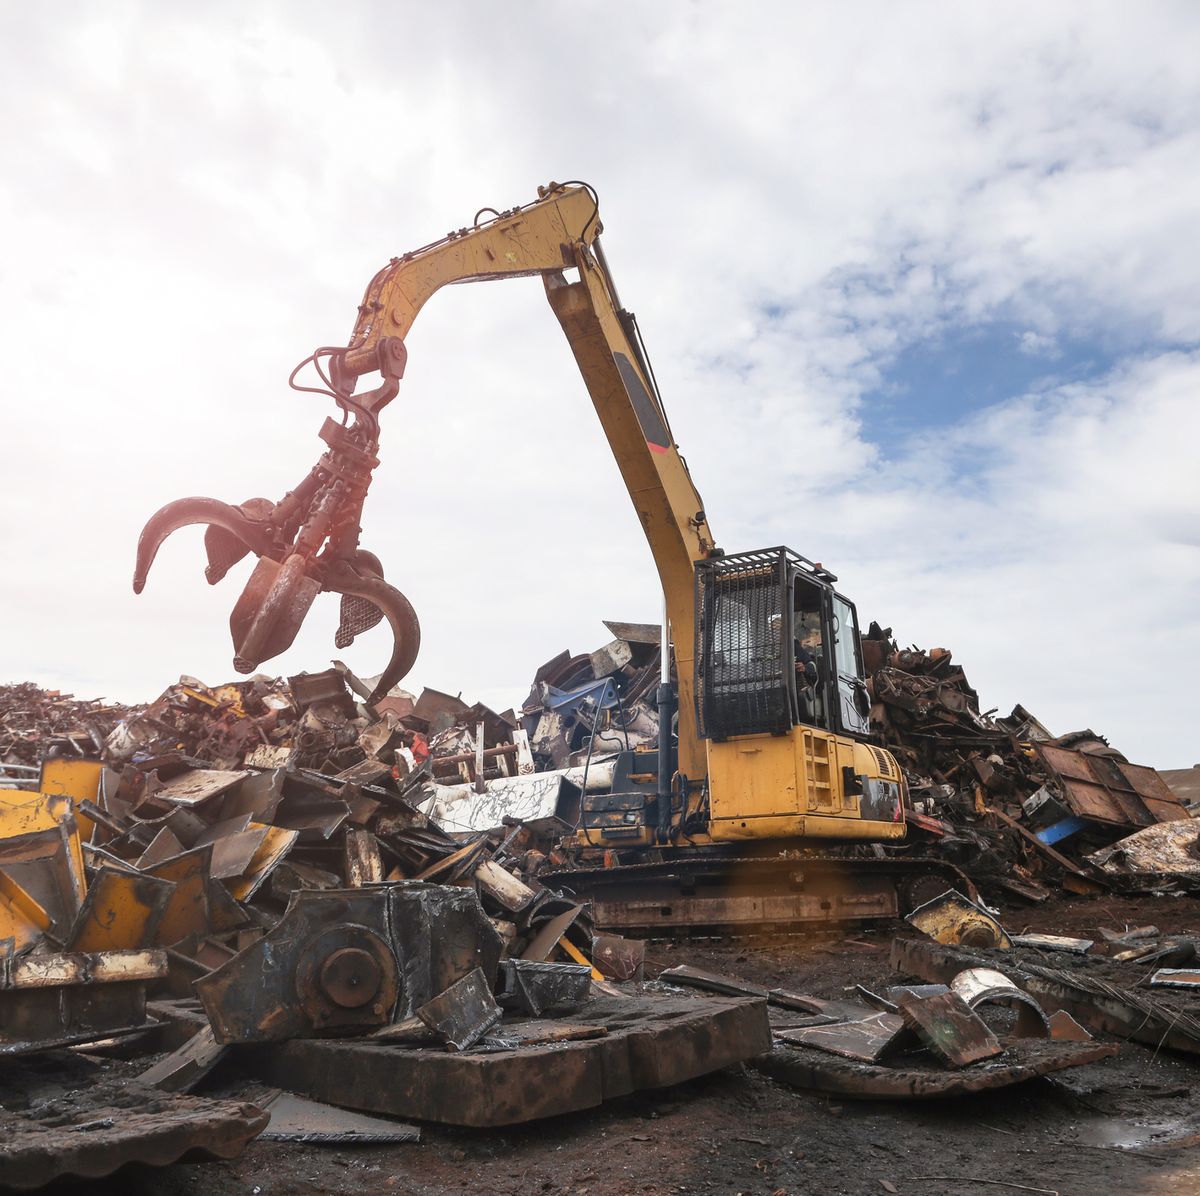 Scrap Metal Recycling- 4 Important Things You Need To Know